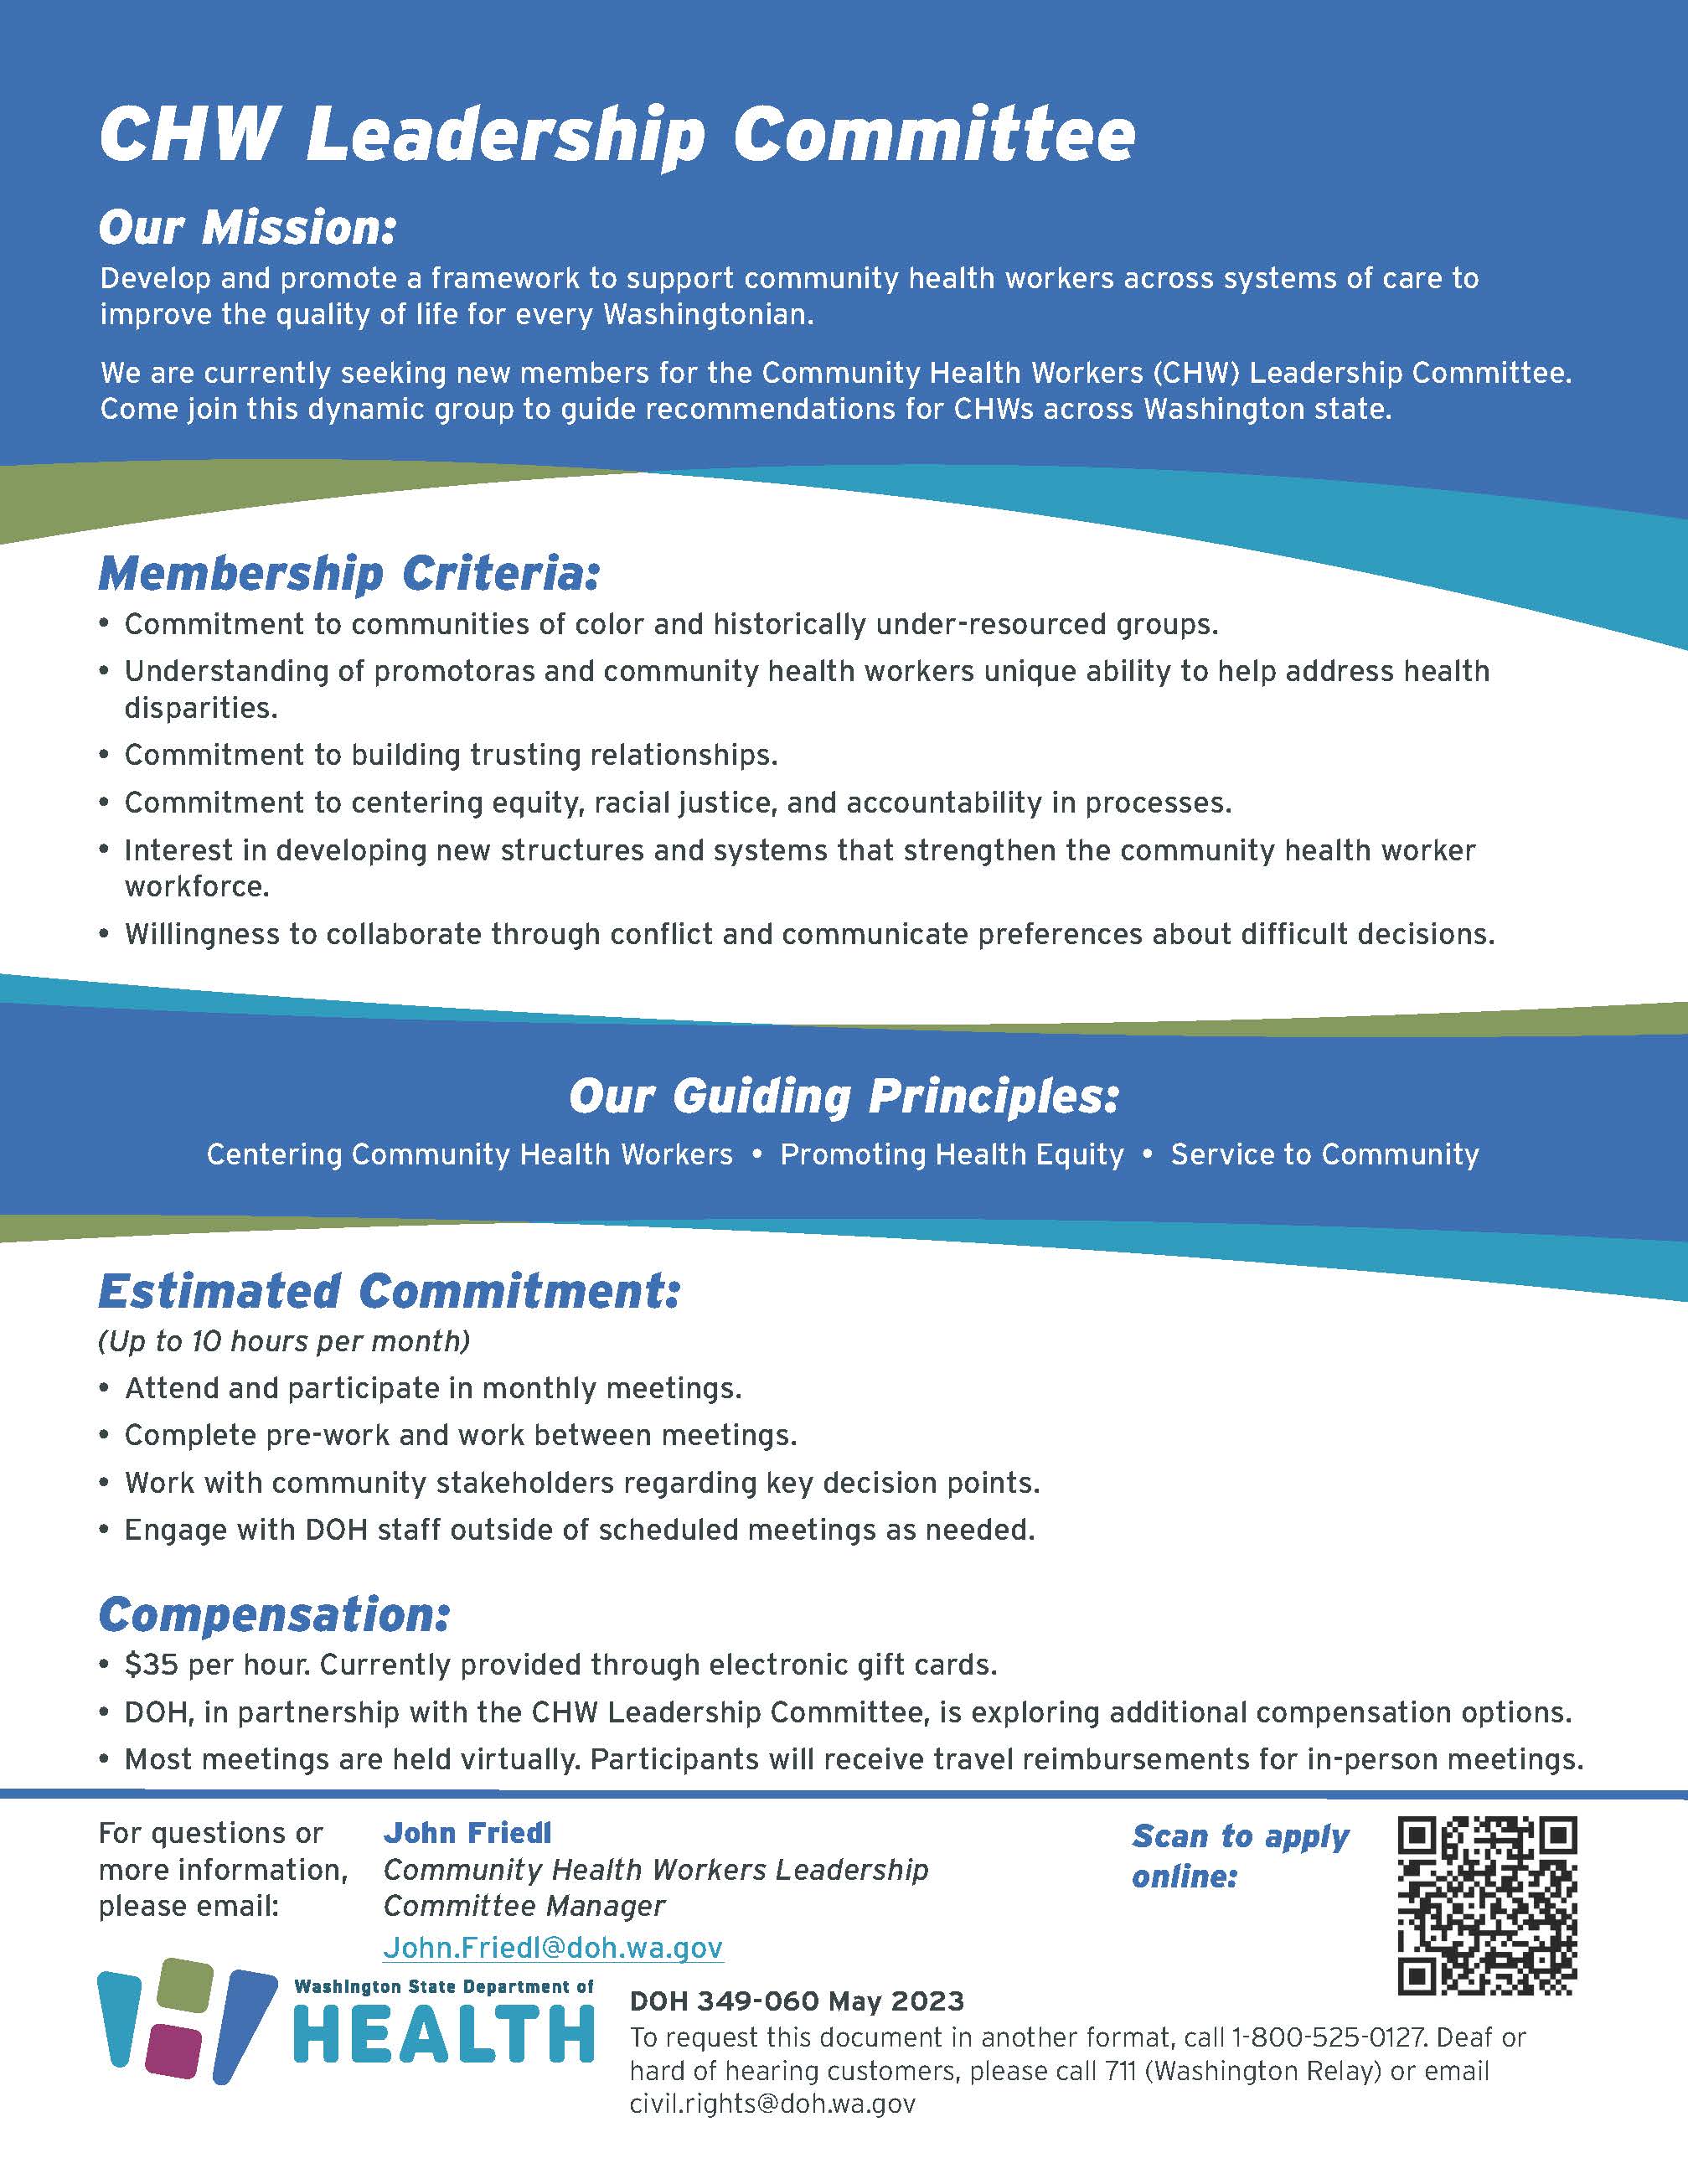 CHW Leadership Committee - Recruitment Flyer-english